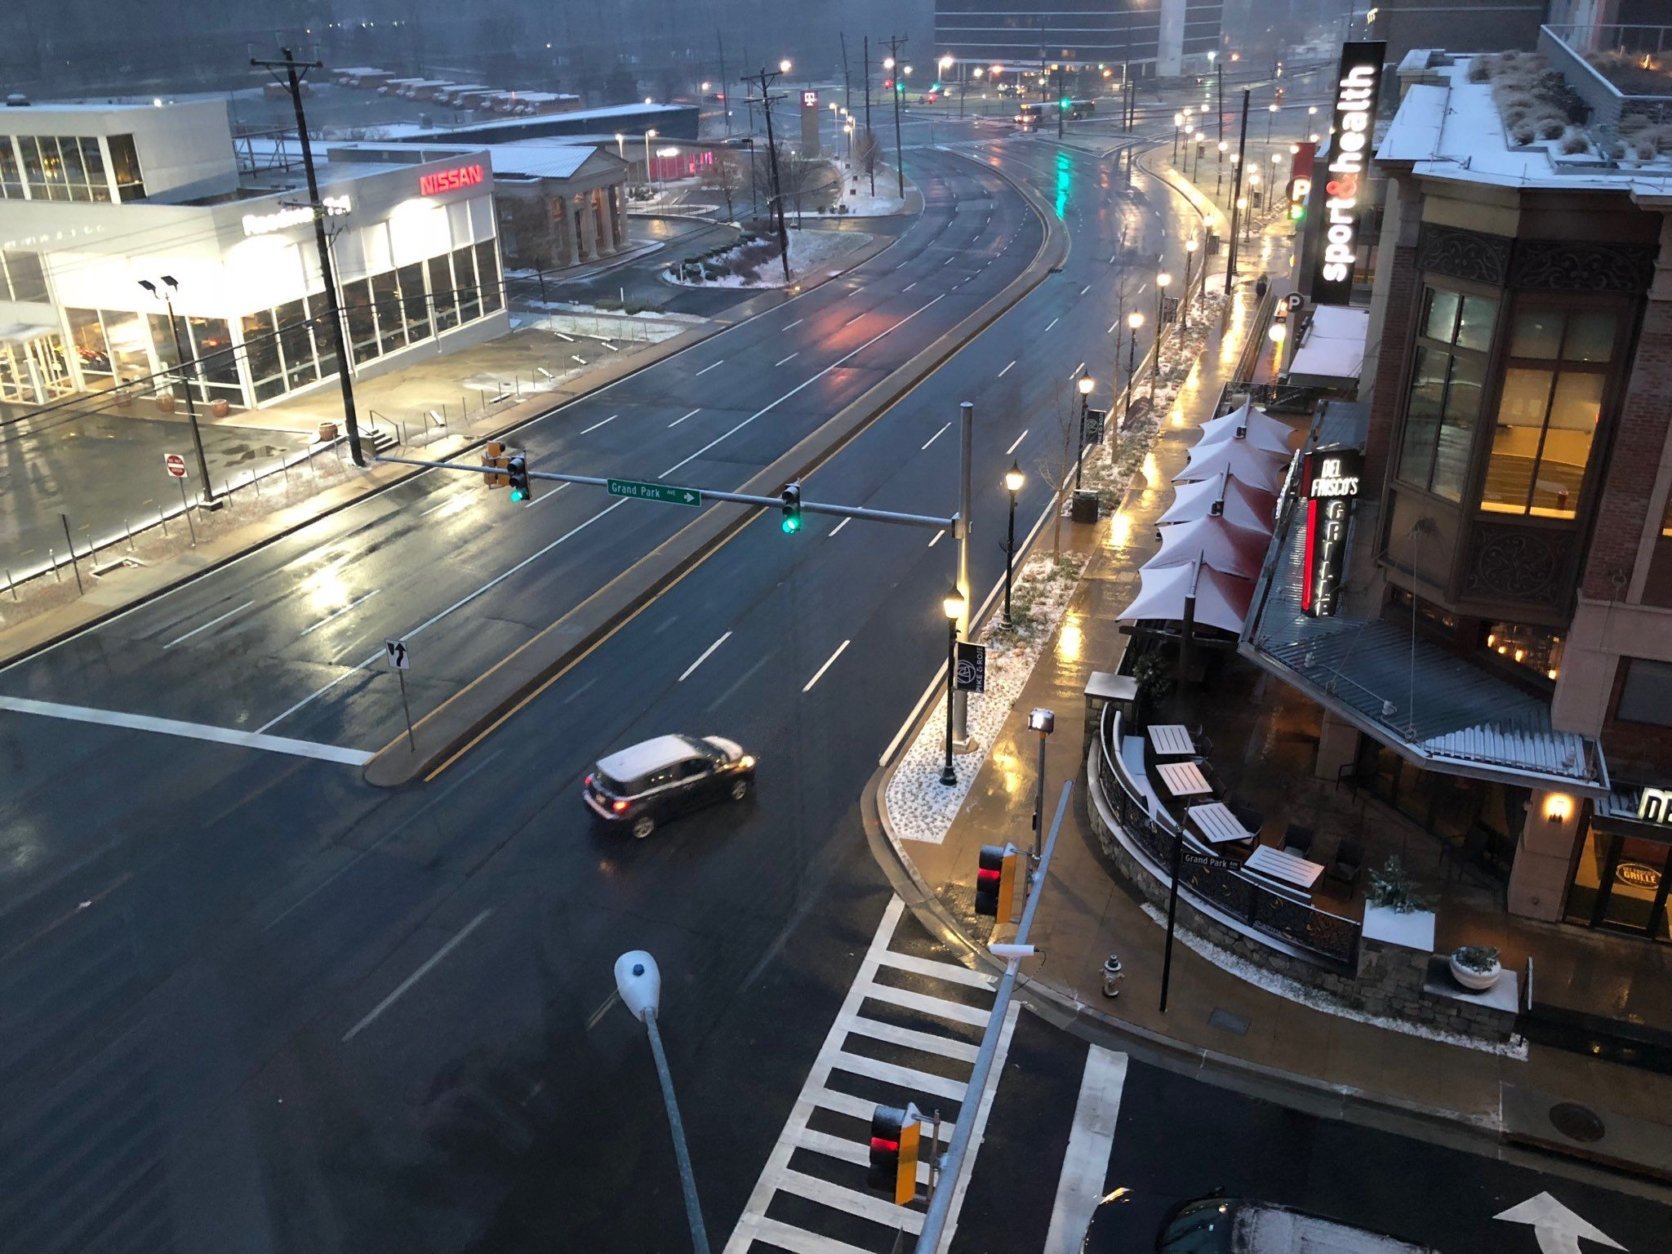 Light snow falls in the Rockville, Maryland, area Wednesday, March 21. (WTOP/John Aaron)